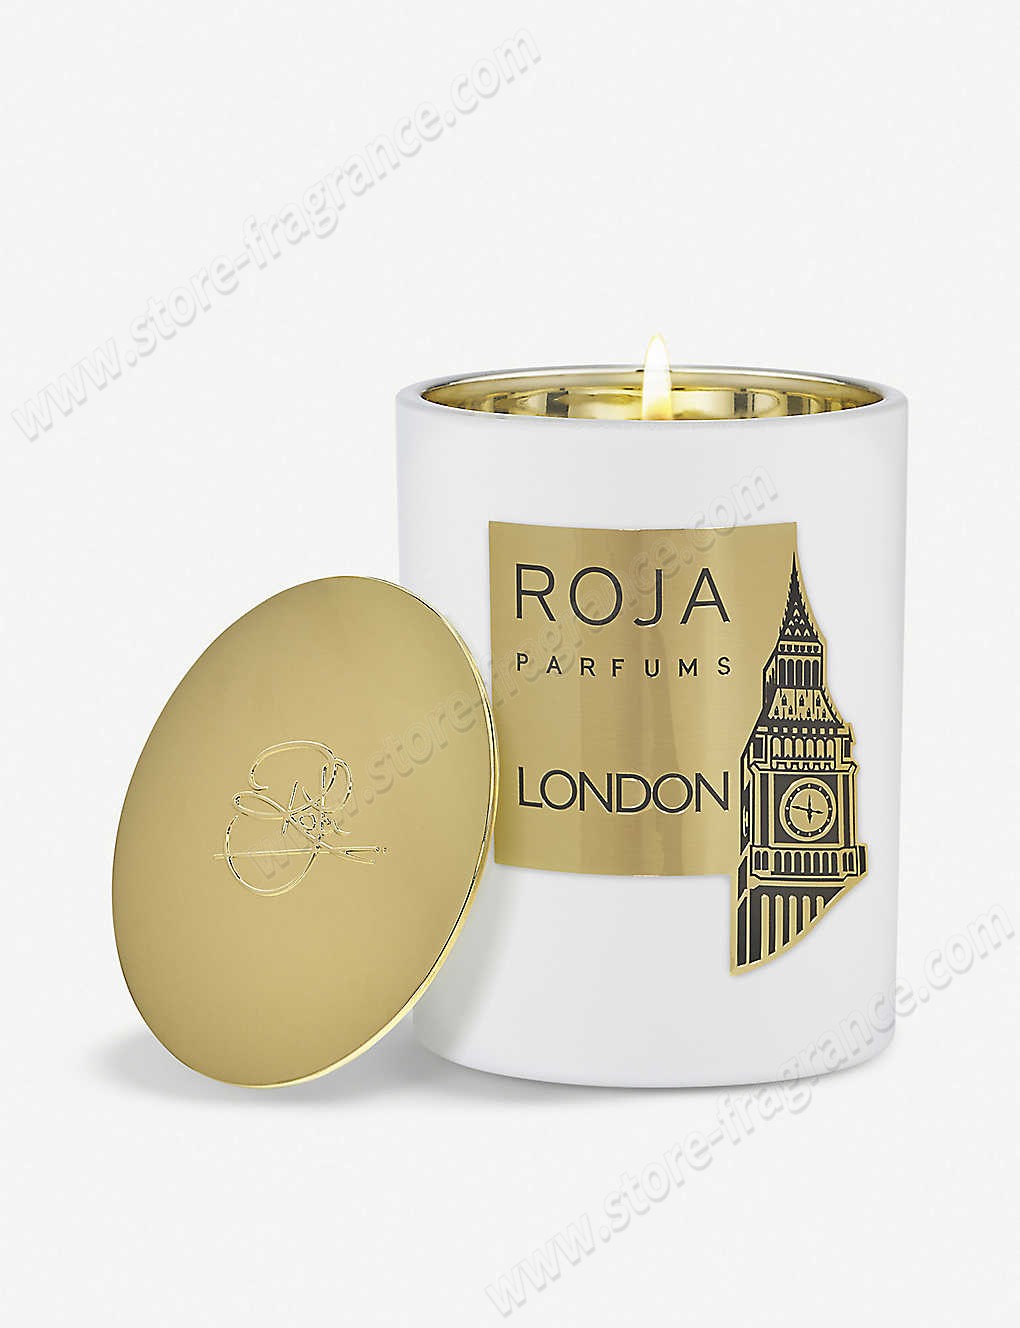 ROJA PARFUMS/London scented candle 300g ✿ Discount Store - -0